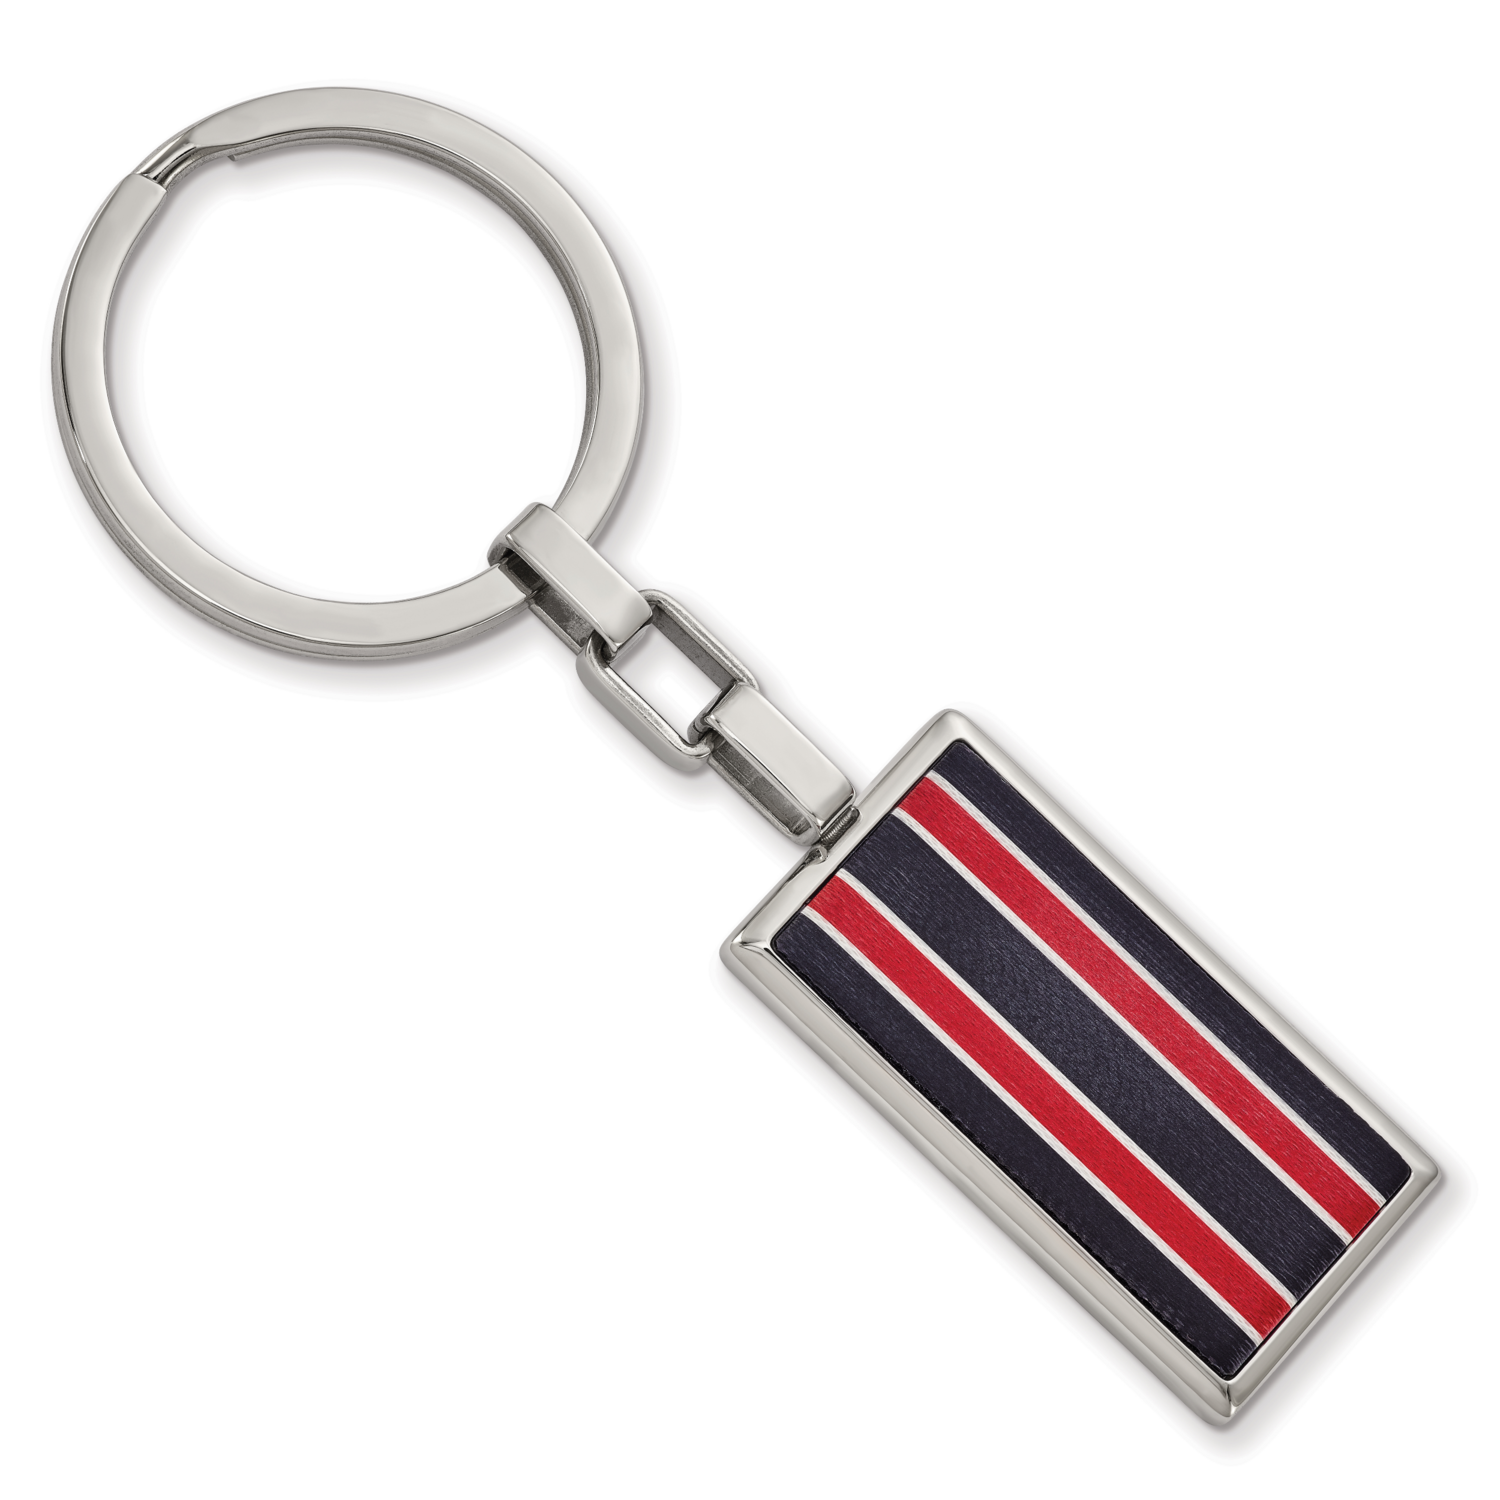 Black and Red Fiber Glass Key Chain Stainless Steel Polished SRK165